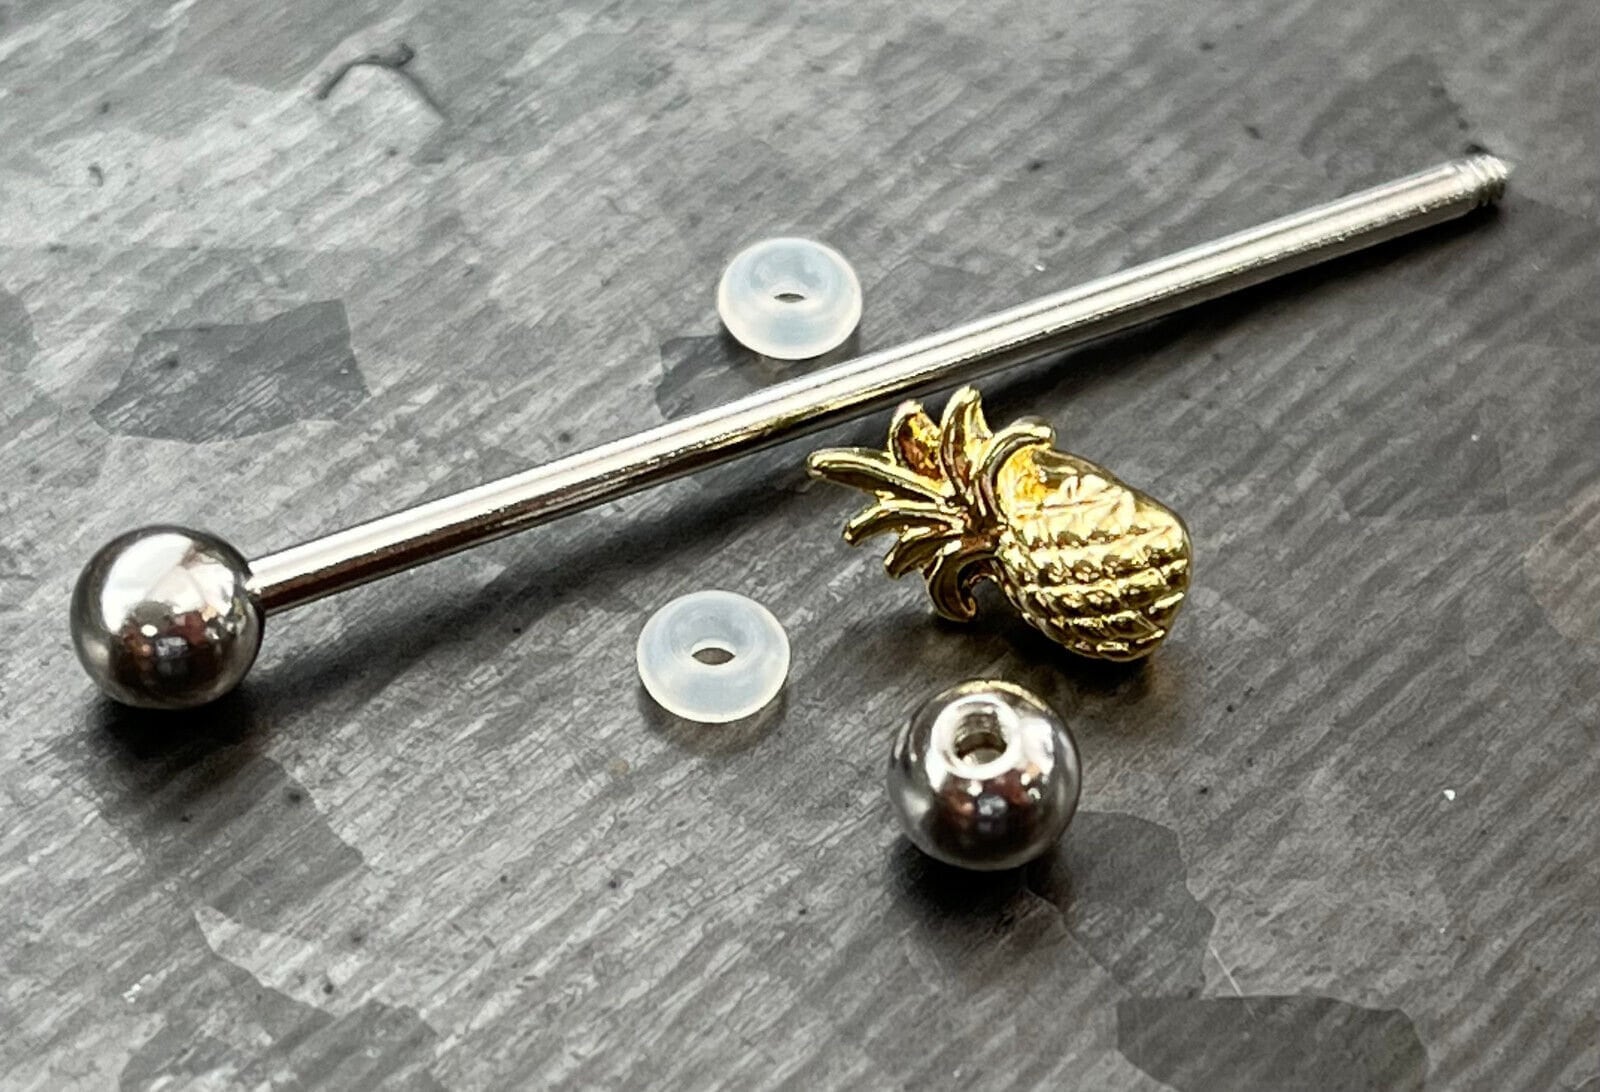 1 Piece Unique Movable Pineapple Industrial Barbell - 14g - (38mm) 1&1/2" Wearable Length Available!